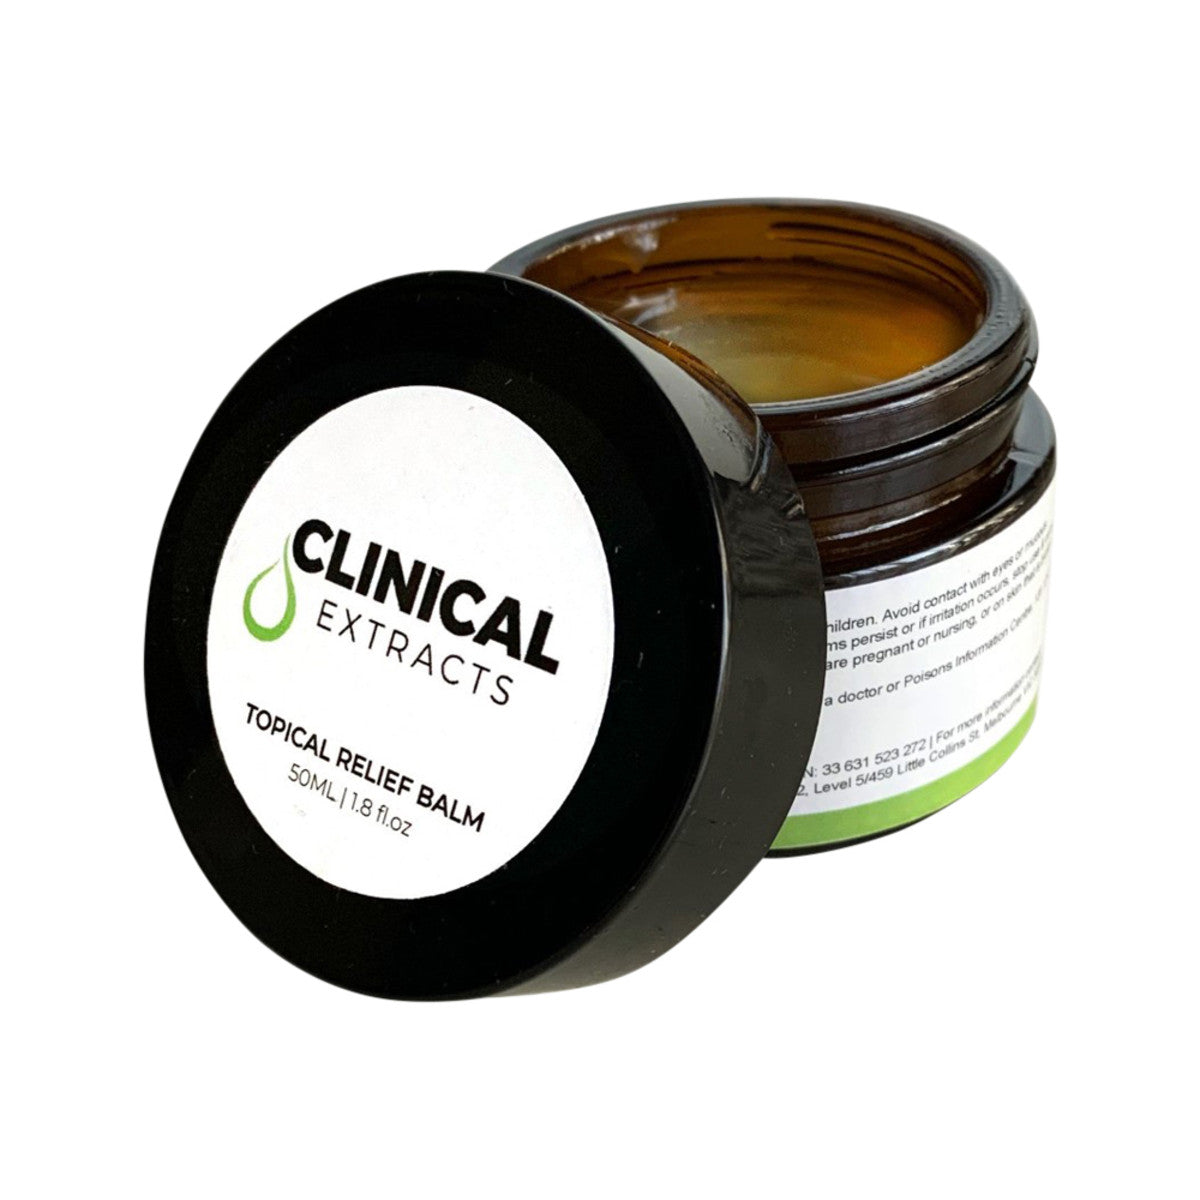 Clinical Extracts - Topical Relief Balm